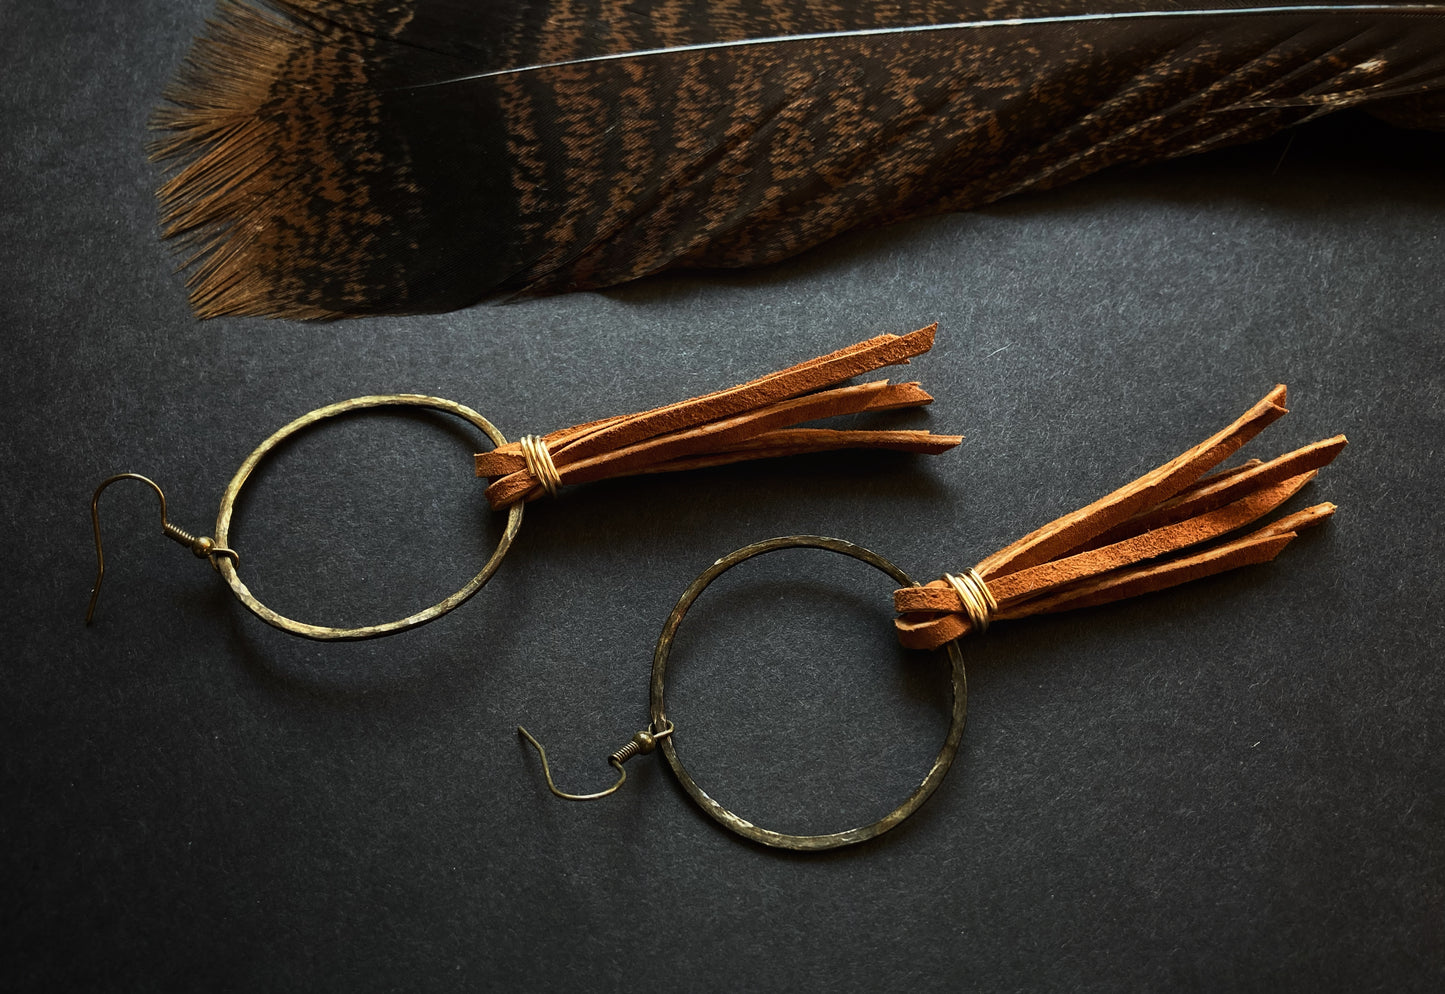 The Chiliad Leather Earrings